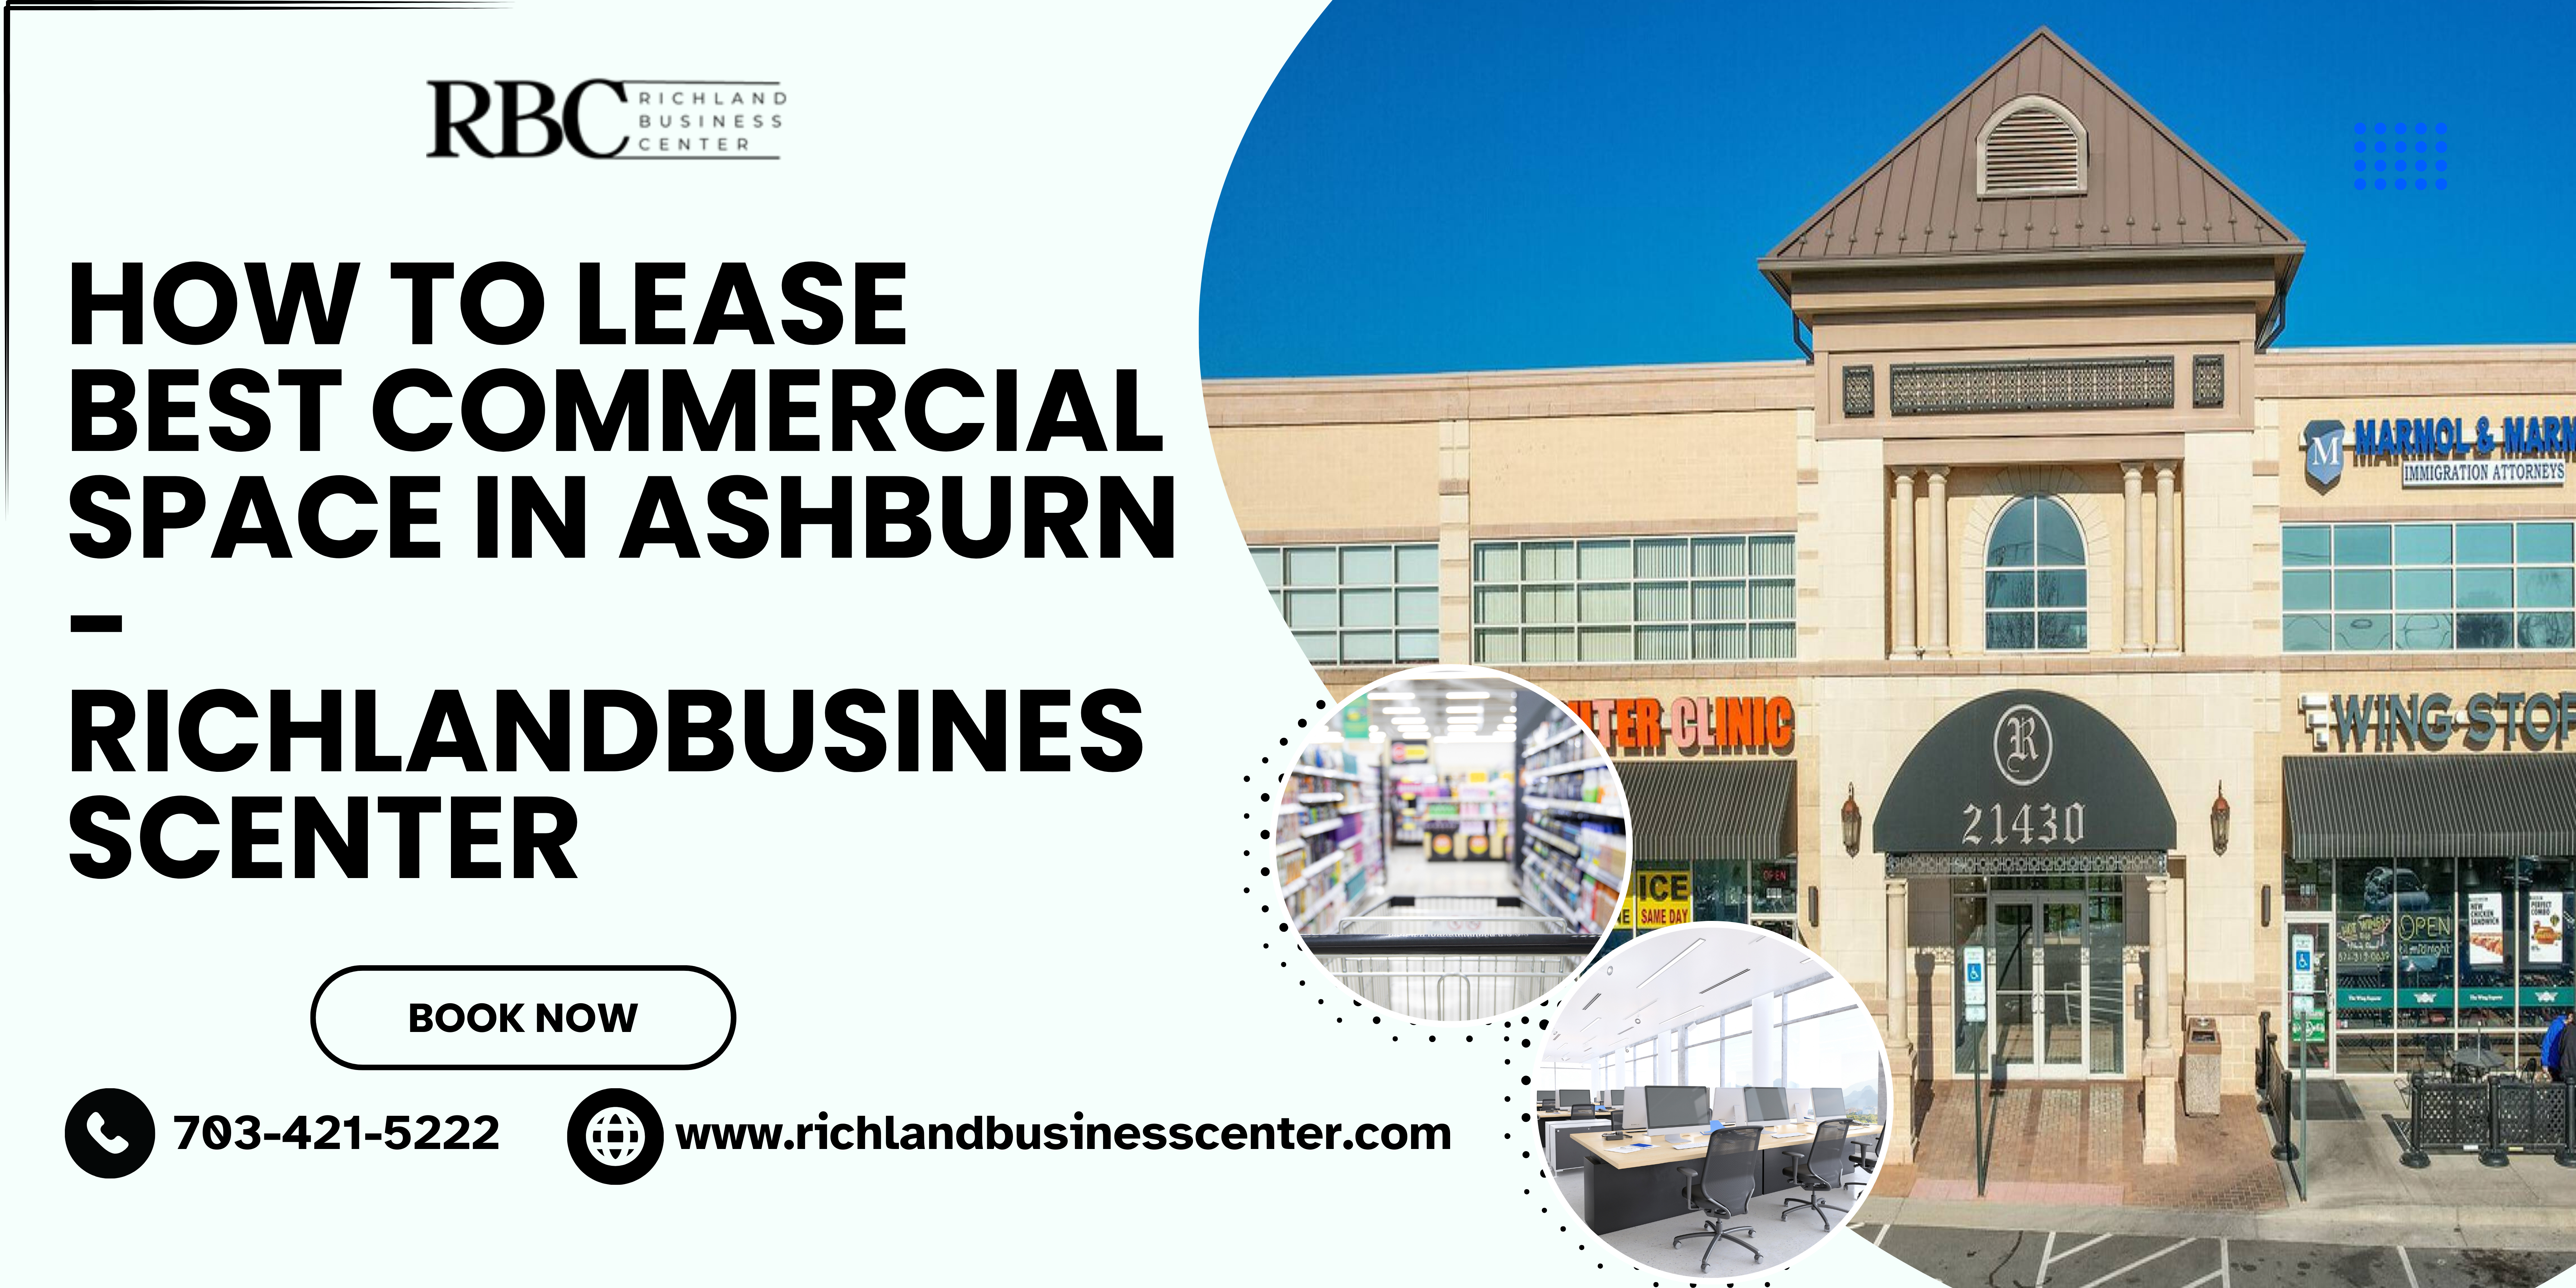 How to lease best commercial space around Ashburn